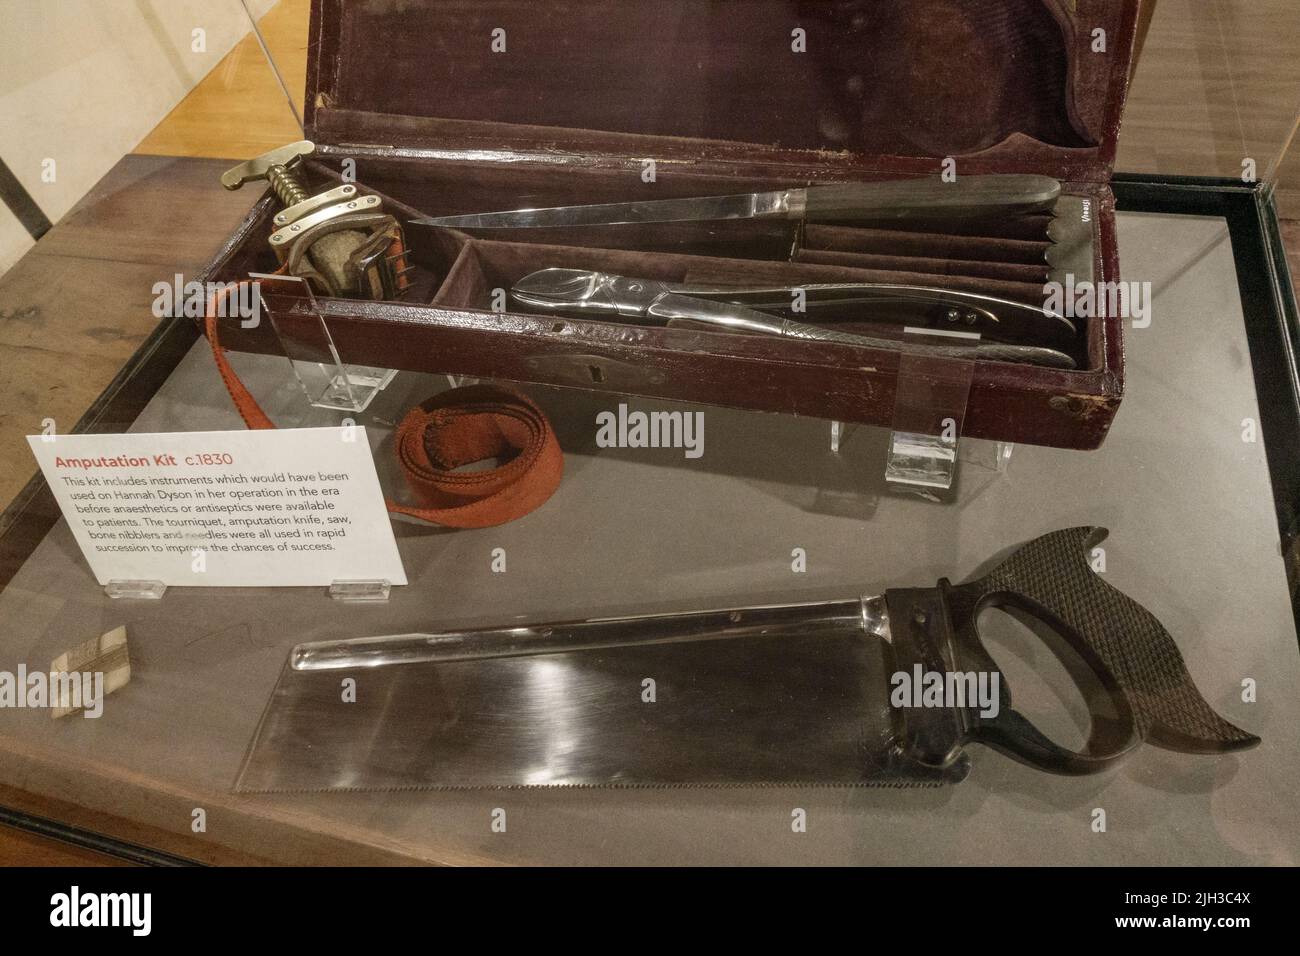 An early Victorian amputation kit (c1830) on display in the Thackray Museum of Medicine, Leeds, UK. Stock Photo